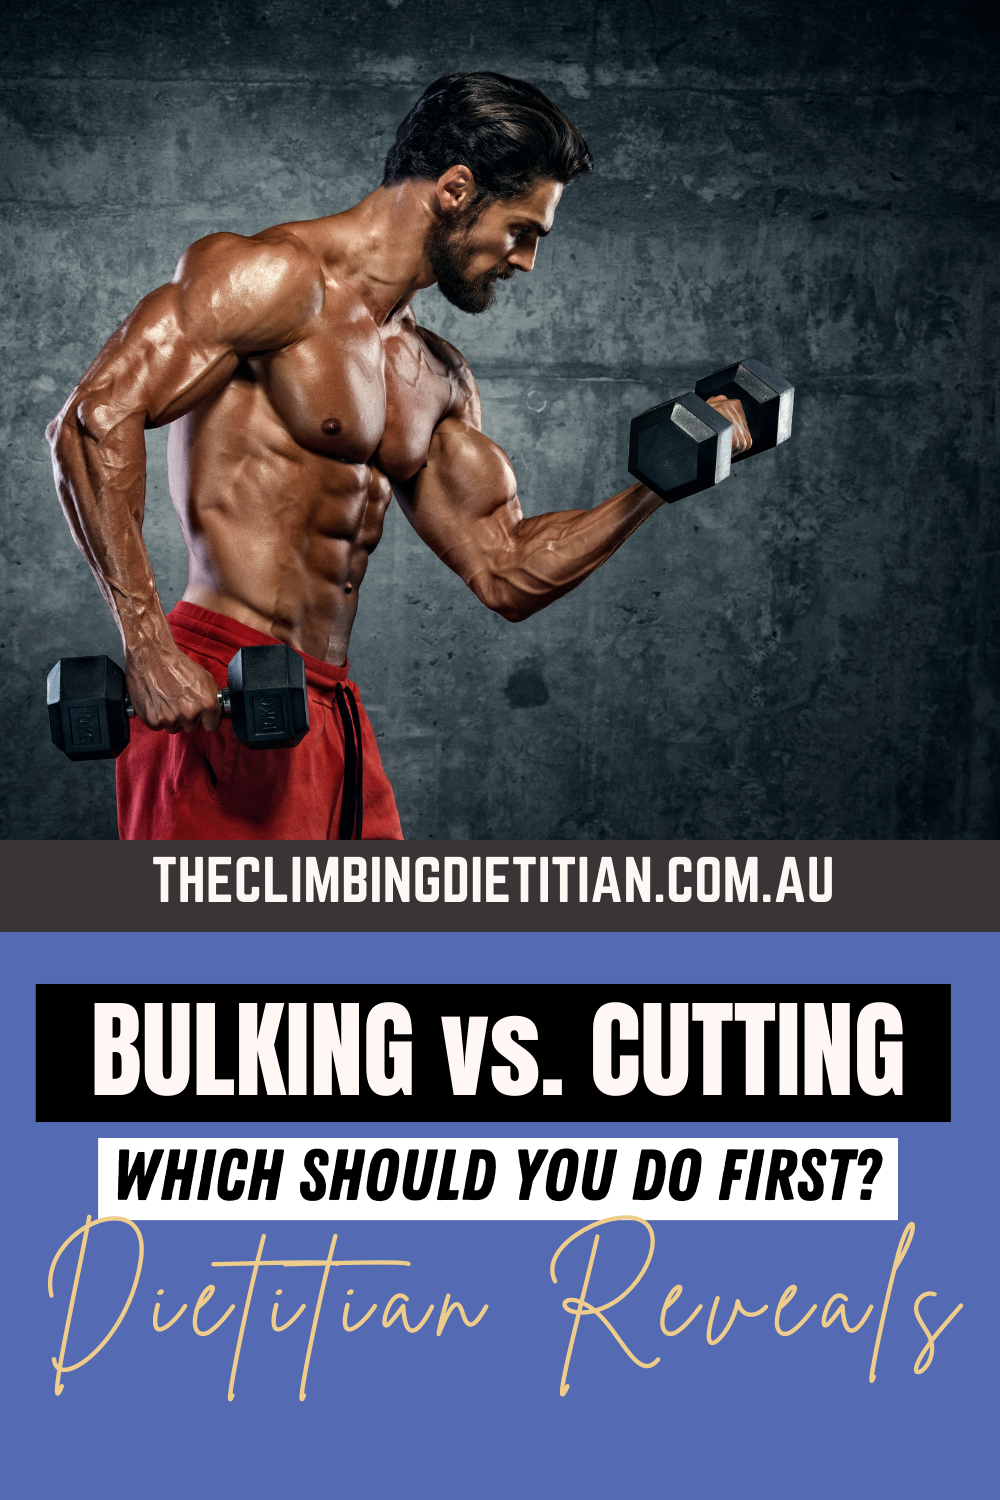 Bulking or cutting: How to decide which is right for you